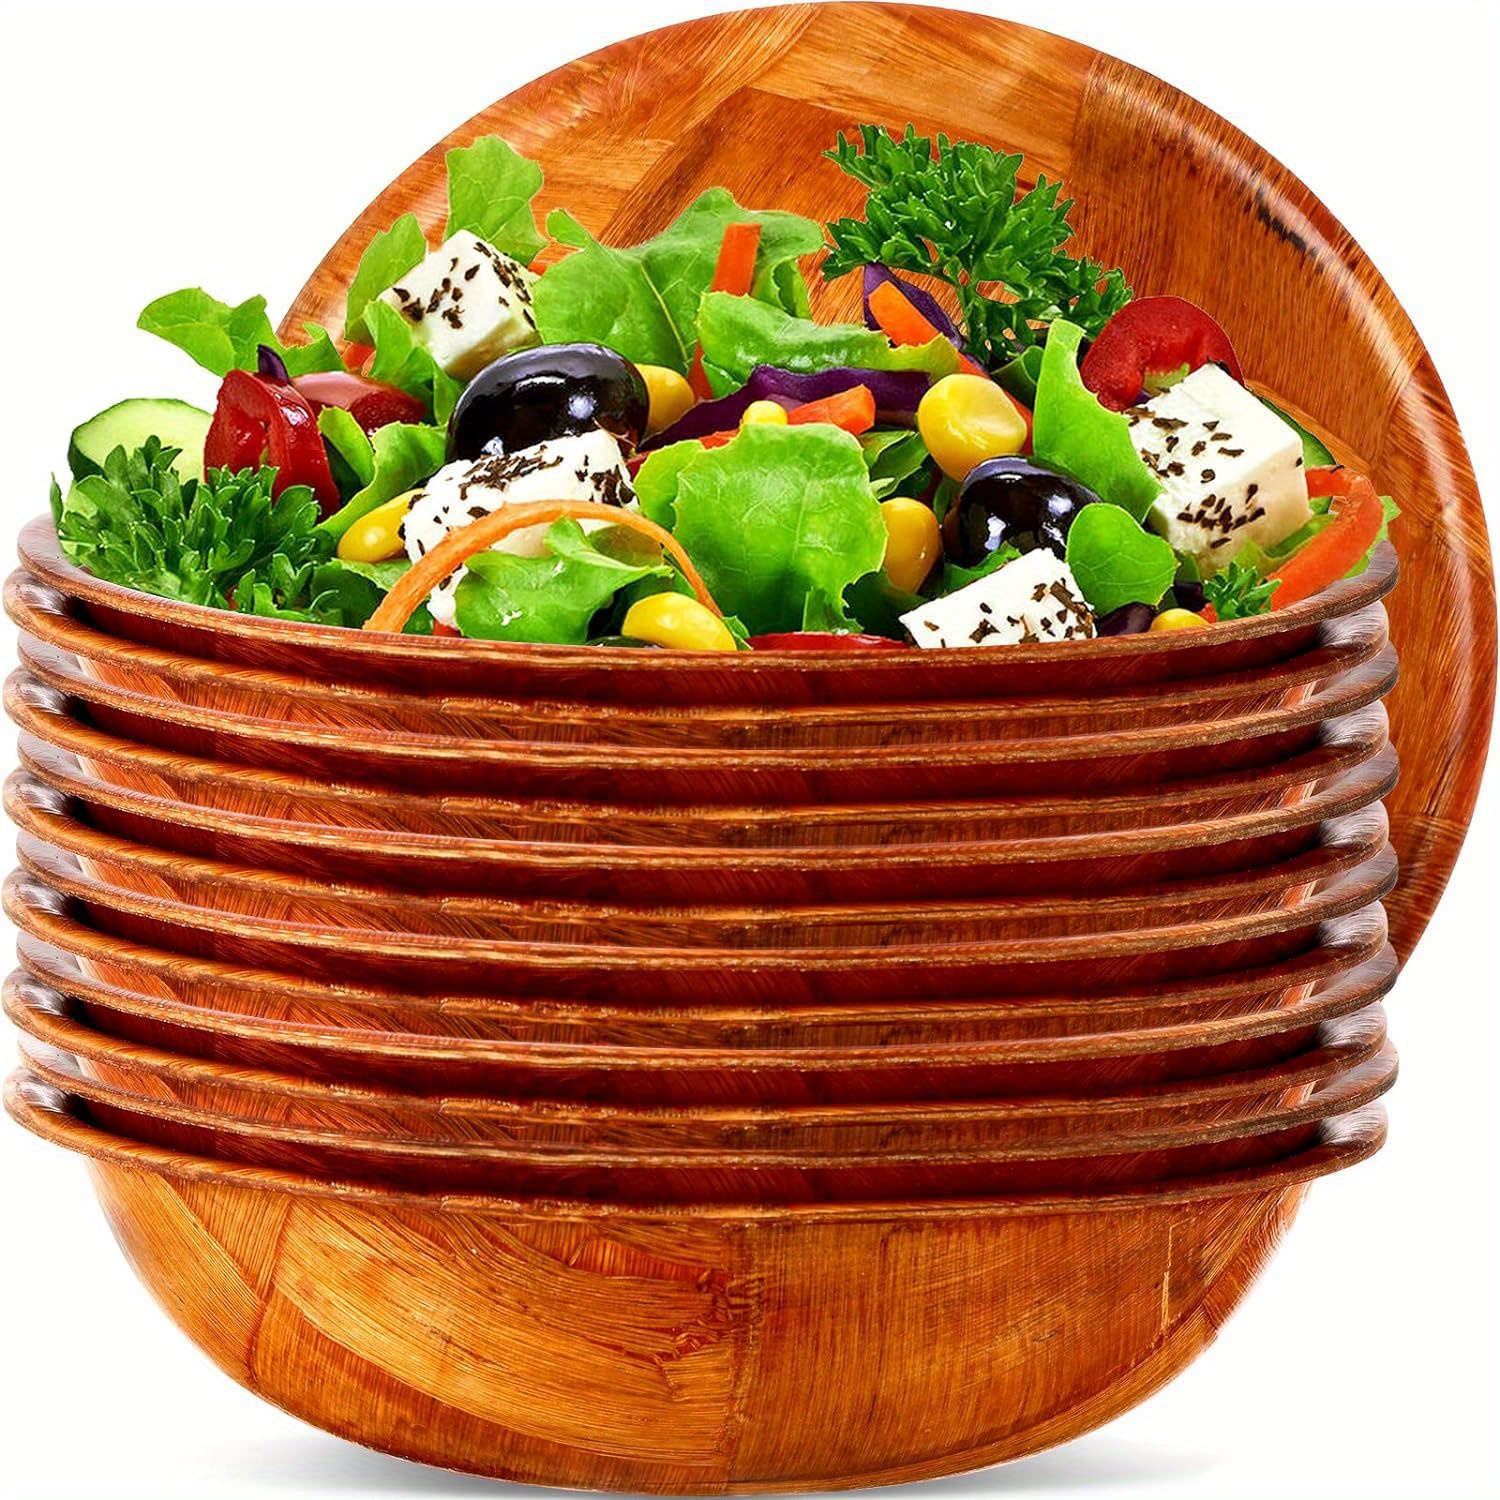 

Handmade Wooden Salad Bowls - Set Of 4, Round Woven Wood Serving Bowls For Salad, Fruit, Snacks - Durable, Glossy, Stackable - 6 Inch